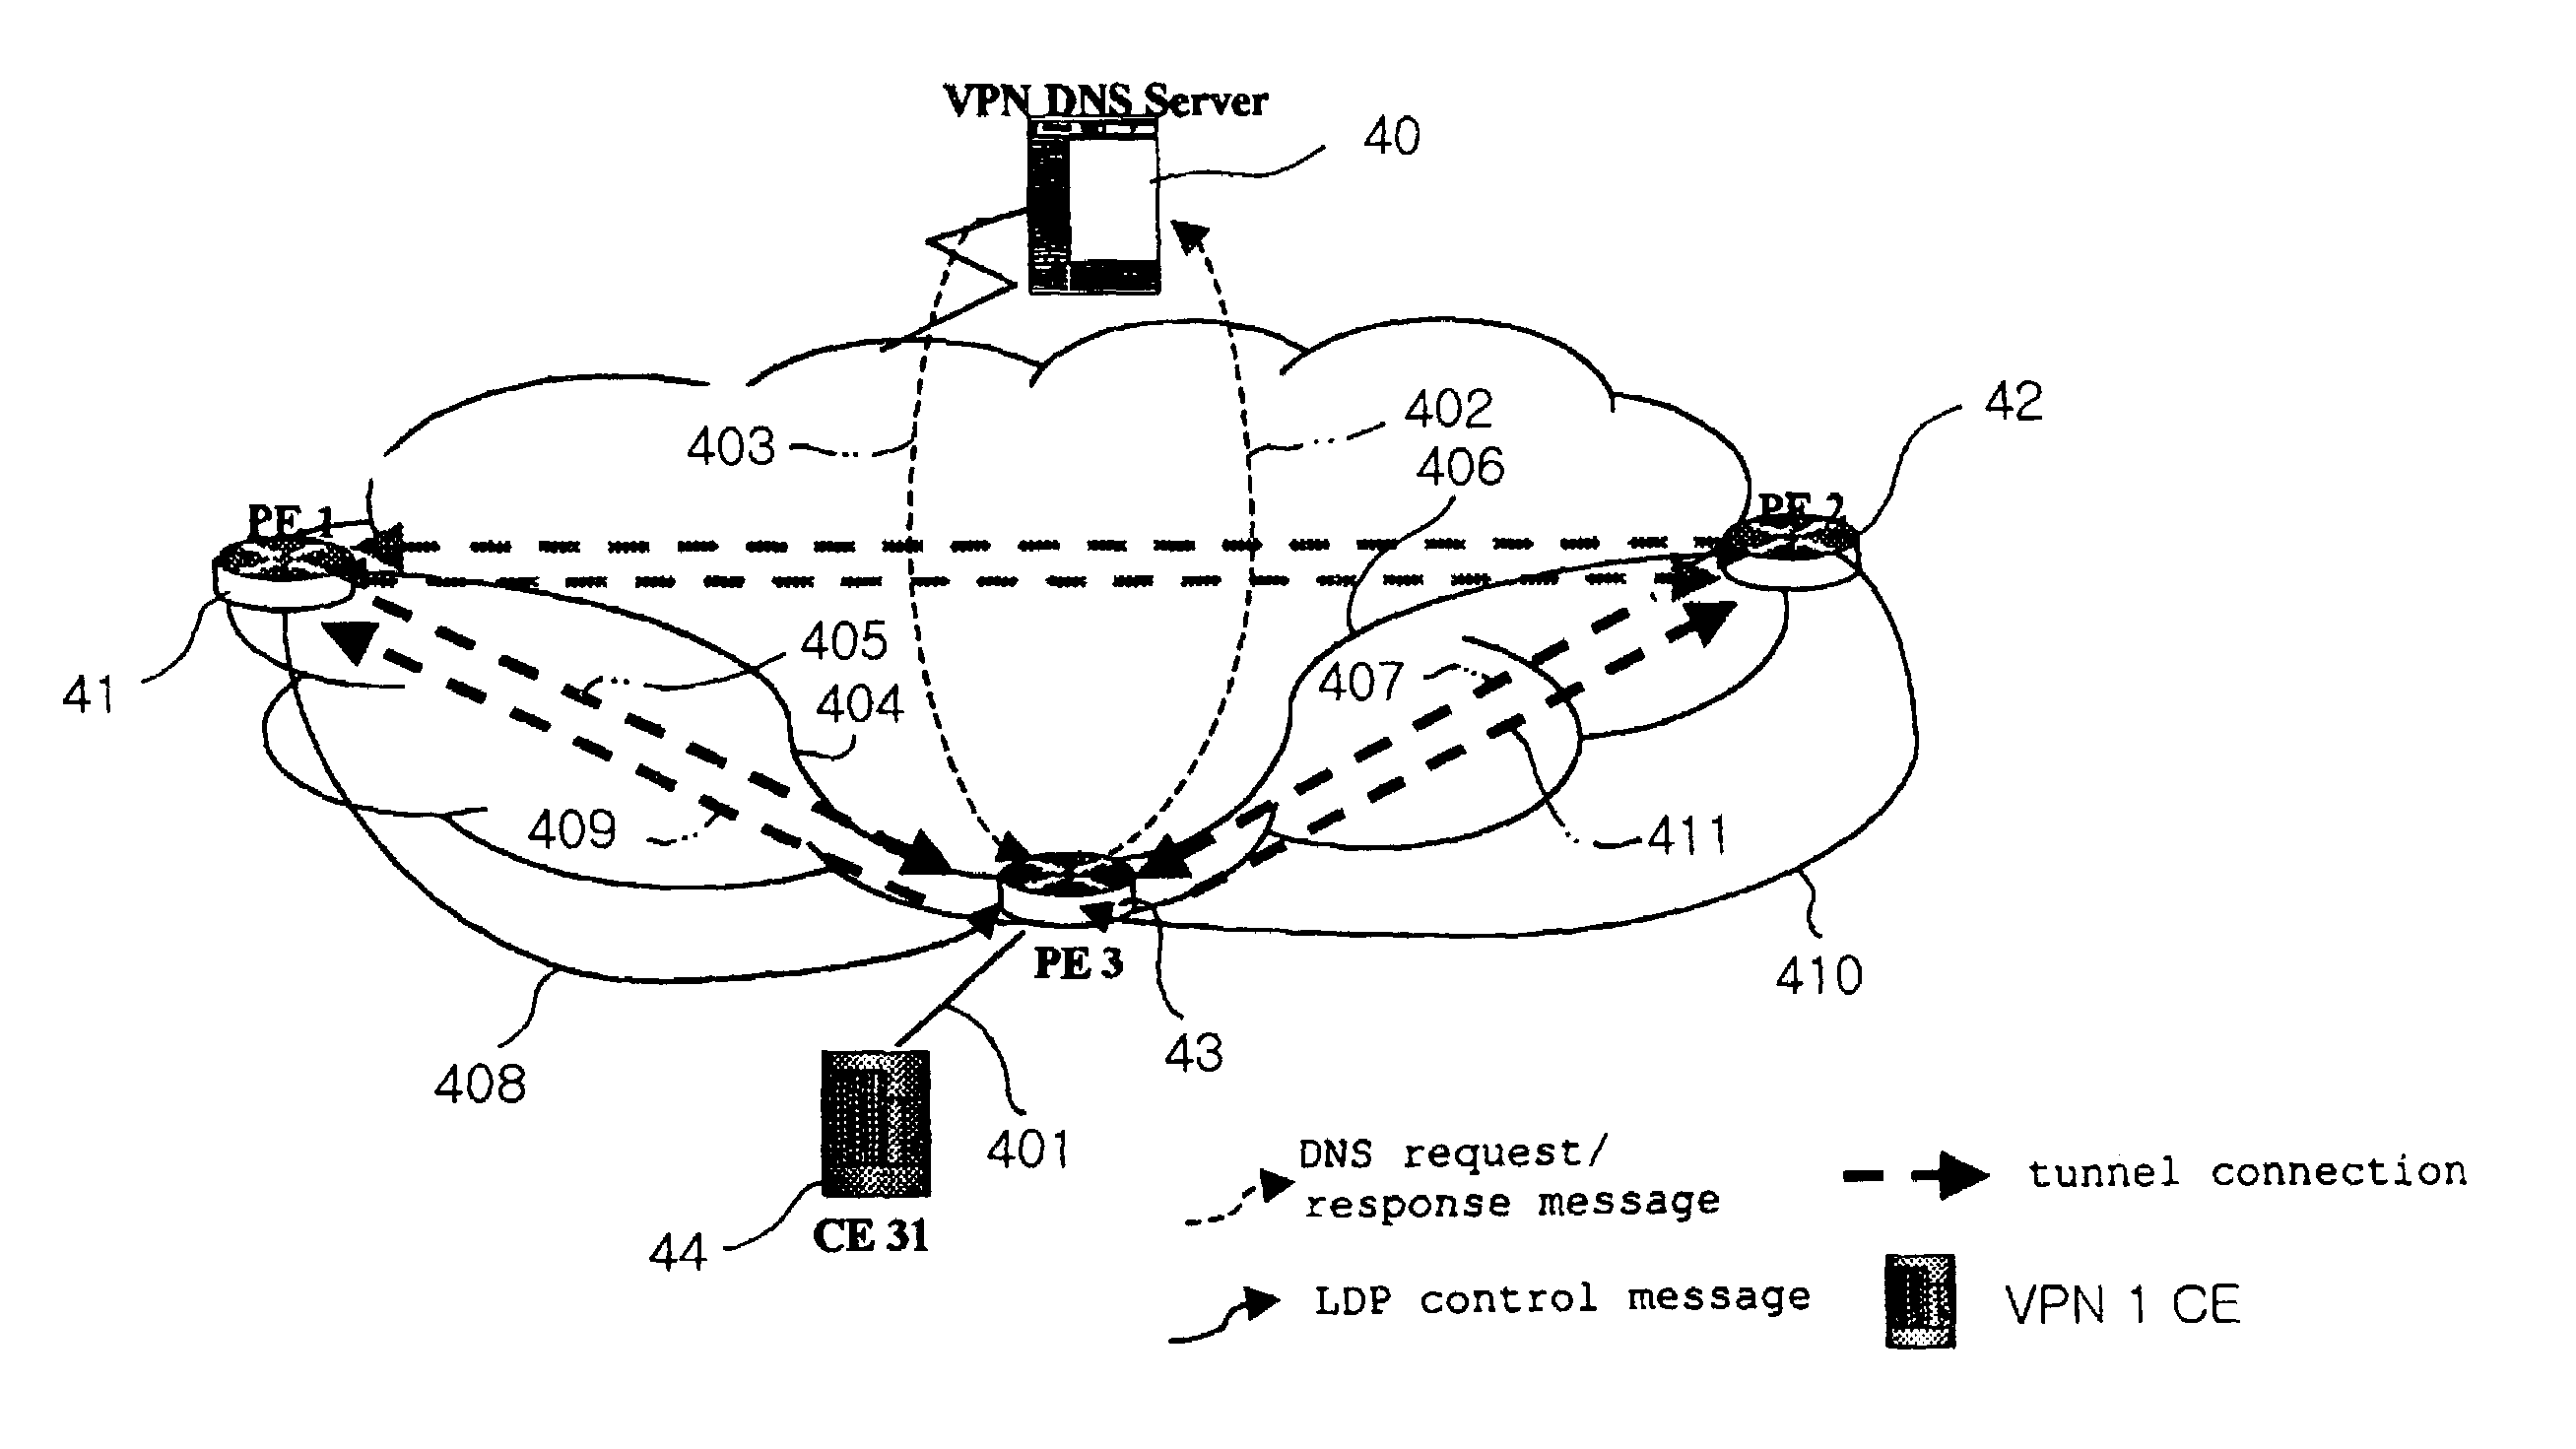 Method for setting up QoS supported bi-directional tunnel and distributing L2VPN membership information for L2VPN using extended LDP